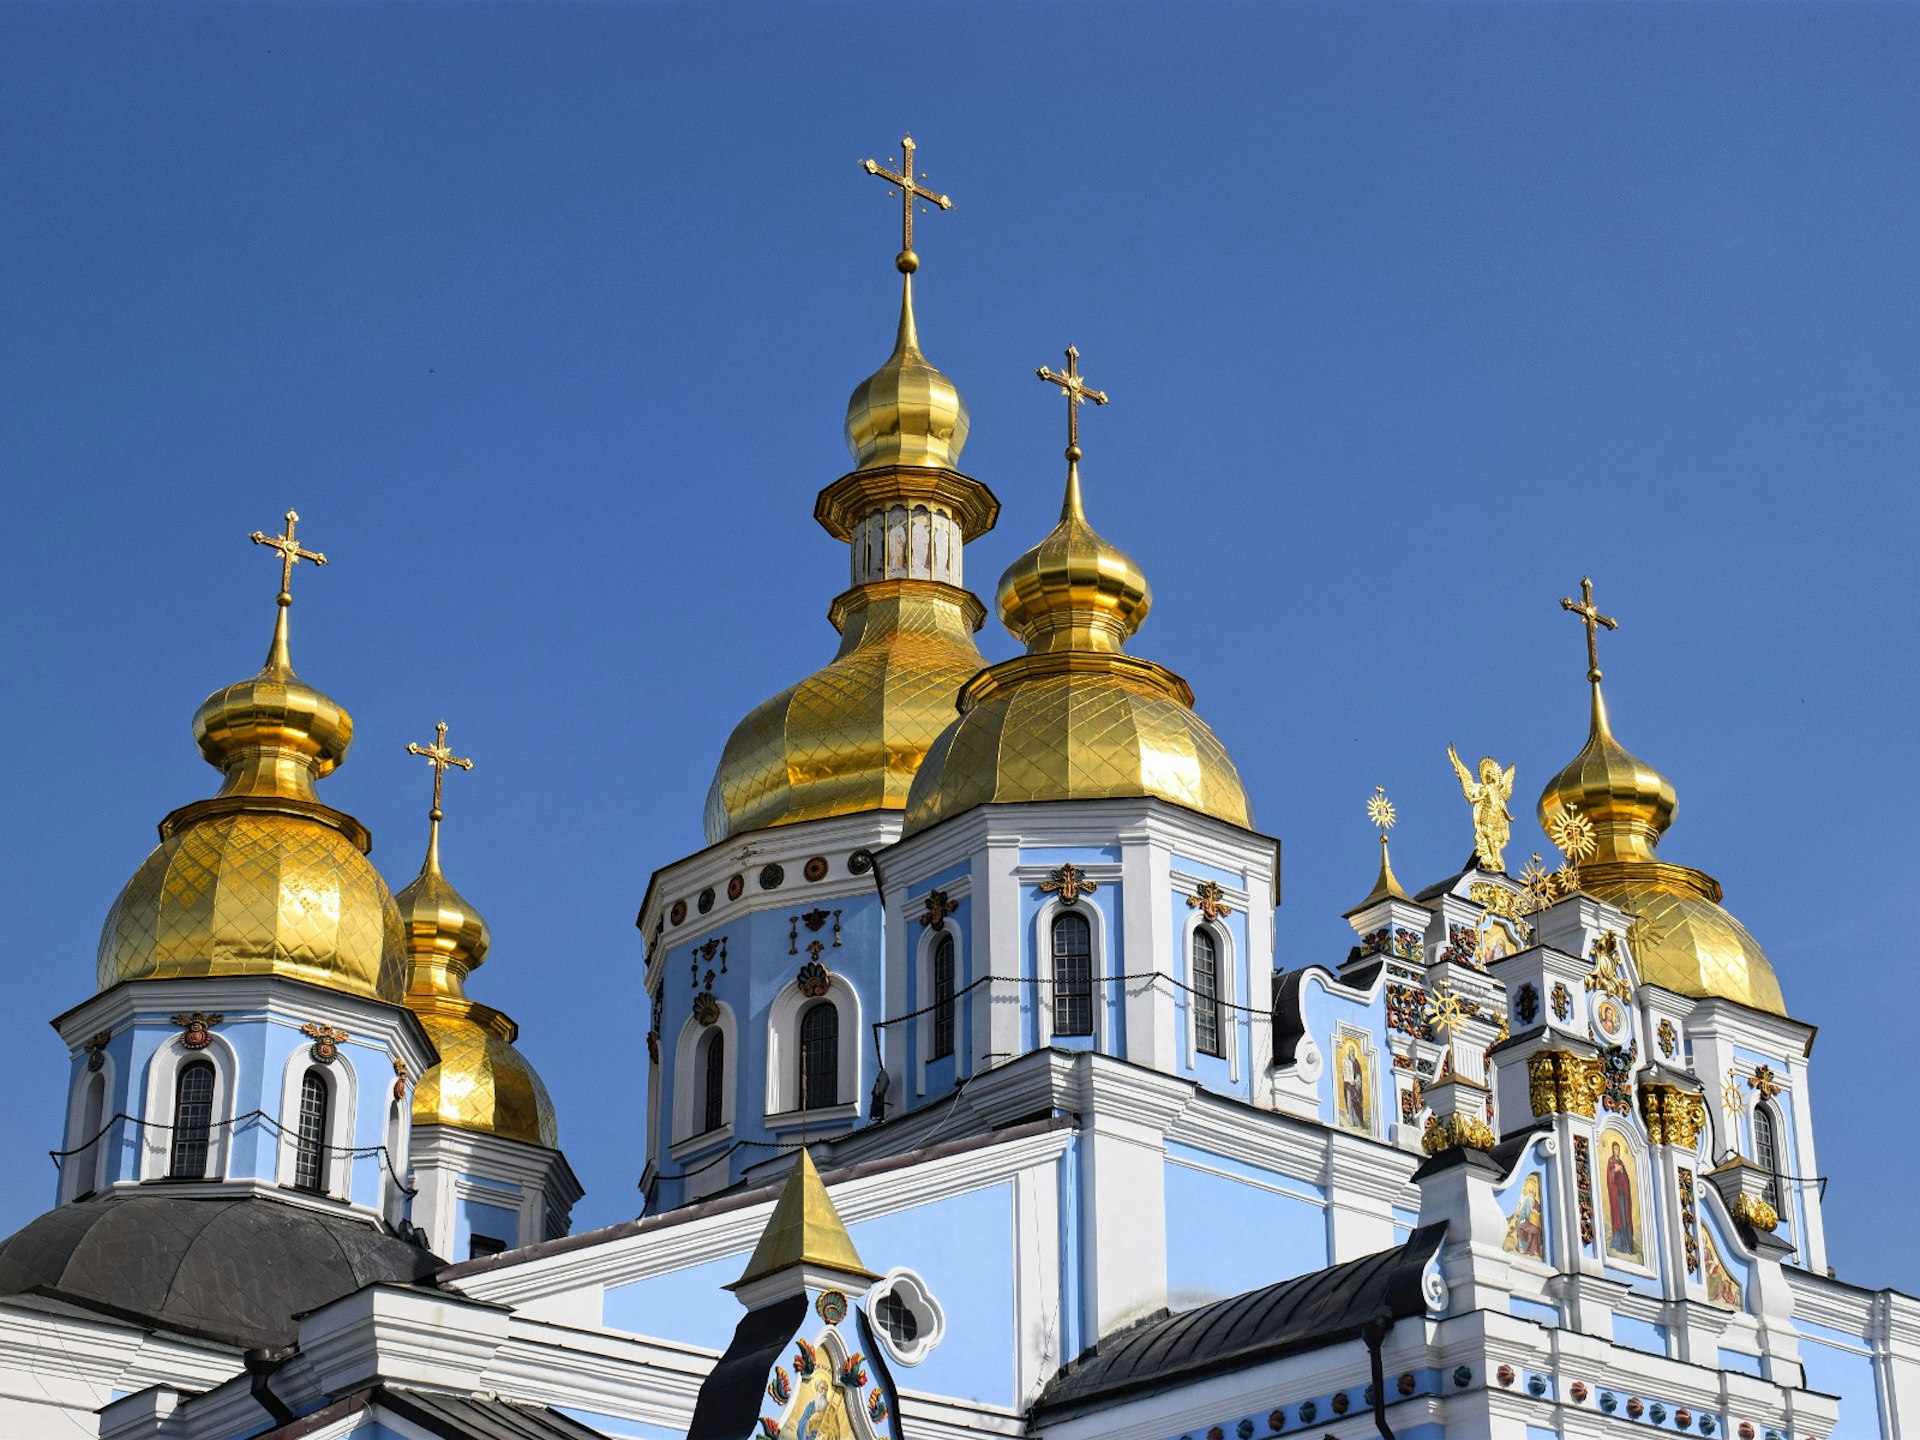 The golden domes of St Michael's Monastery in Kyiv's Old Town © Pavlo Fedykovych / Lonely Planet